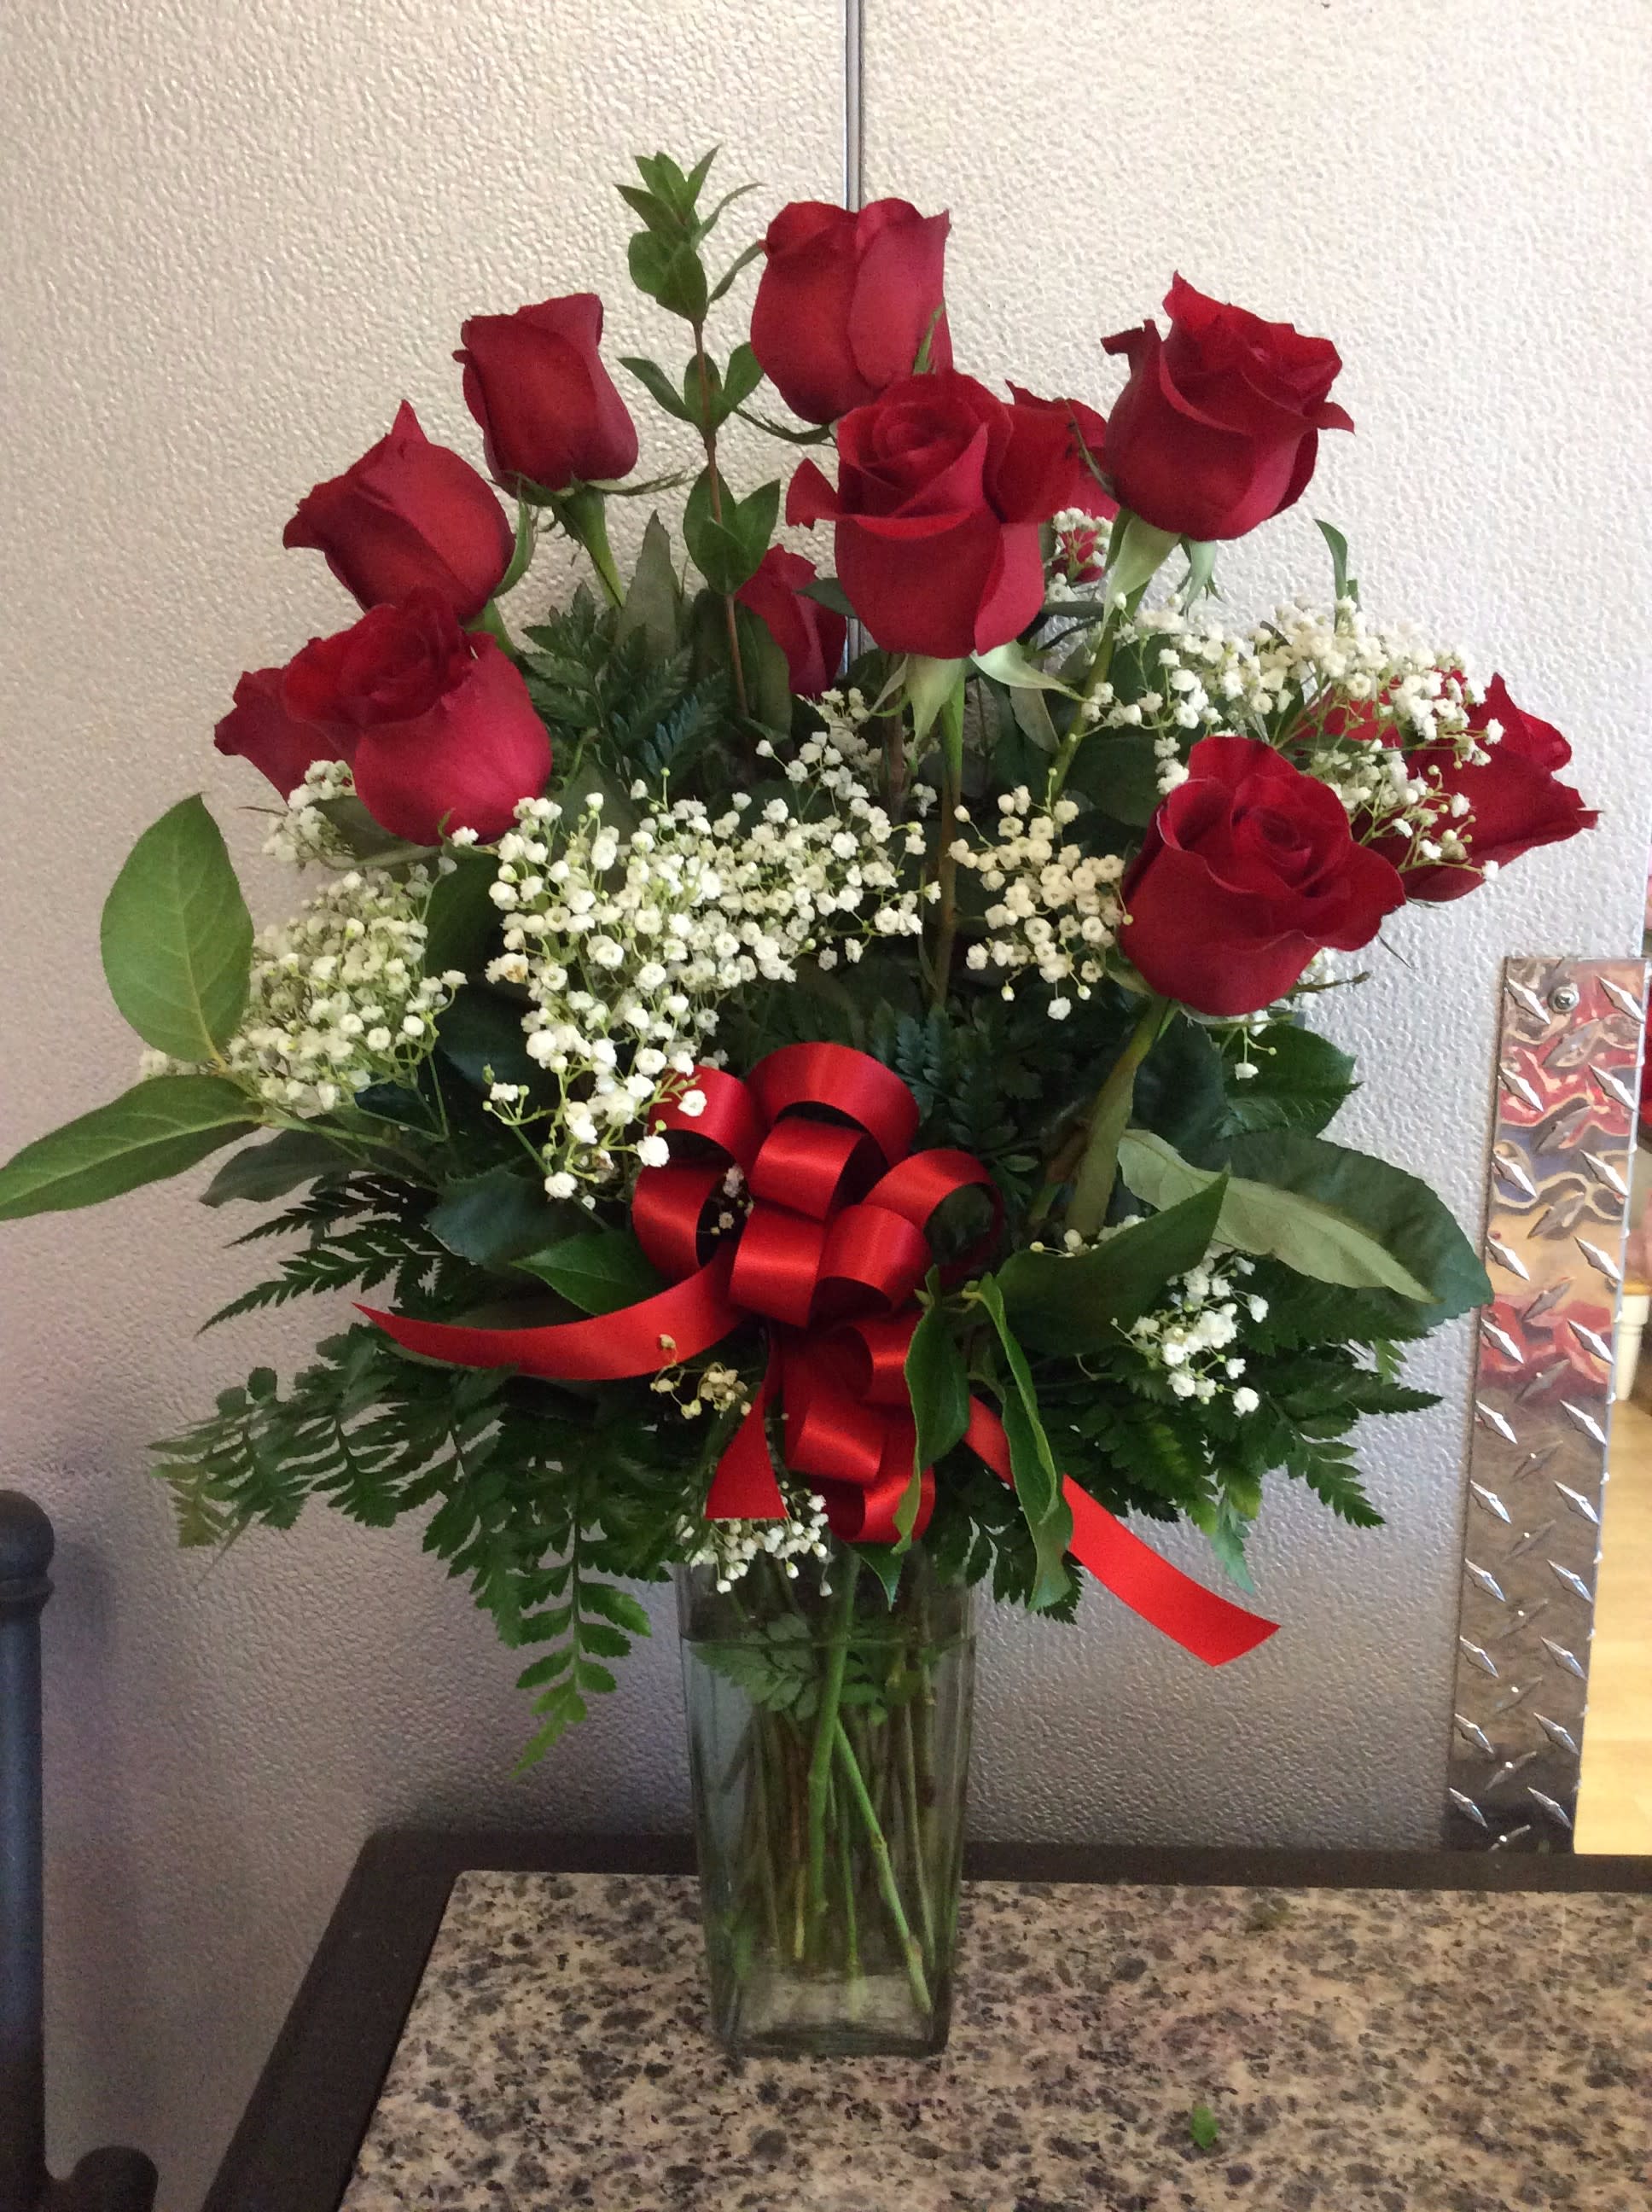 Dz. Red Roses w/ Babies Breath - 12 Red Roses arranged in glass vase w/ filler &amp; greens - Approx. Height 19&quot;